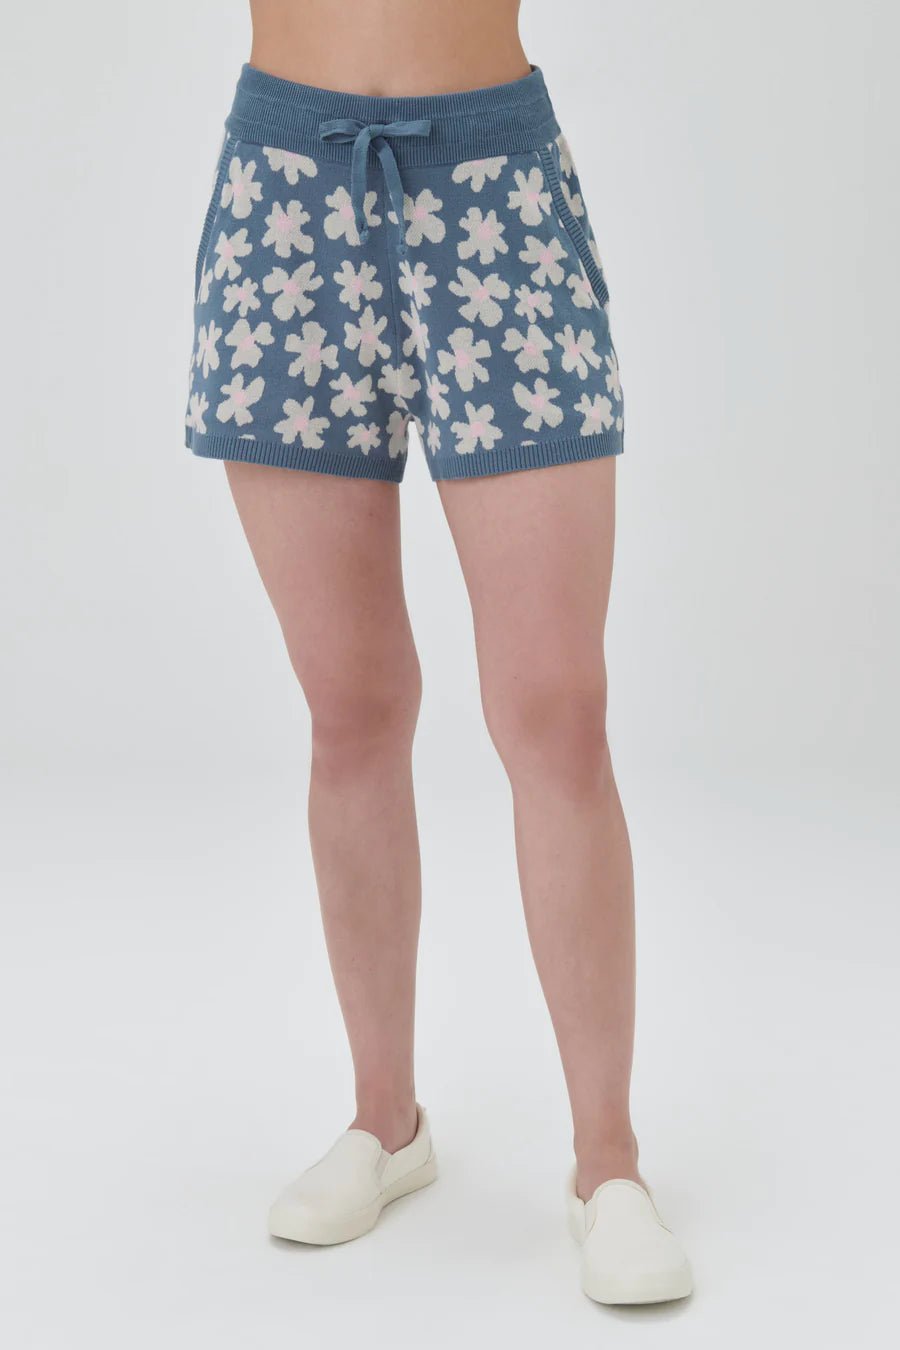 Shop Spiritual Gangster Floral Jacquard Relaxed Sweater Short - Premium Shorts from Spiritual Gangster Online now at Spoiled Brat 